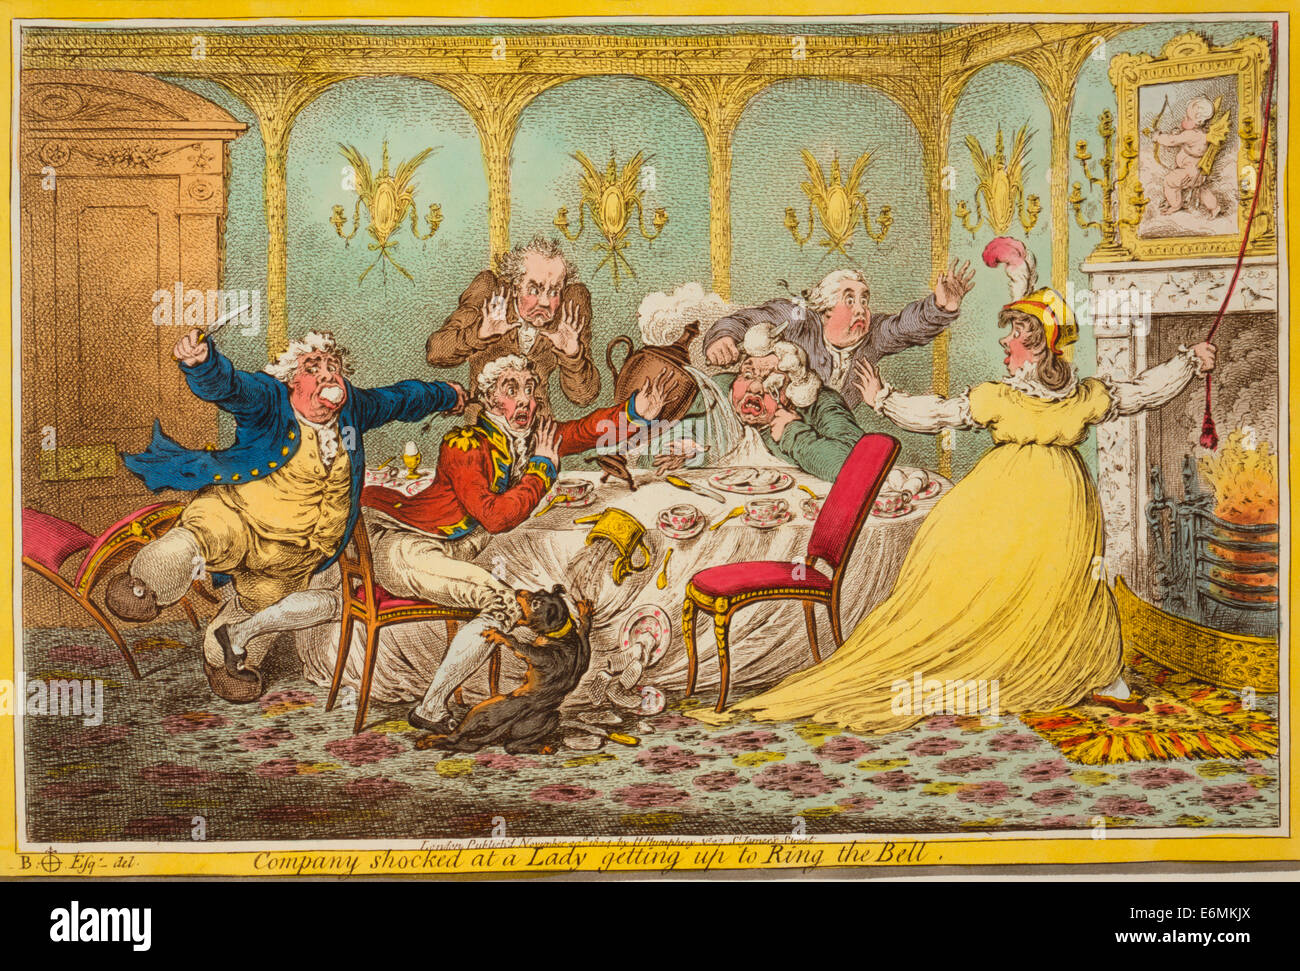 Company shocked at a lady getting up to ring the bell -  A violent disturbance in a breakfast parlor. A woman stands to ring the bell-pull while the five men at the table react in horror, stumbling and knocking over items on the table as they attempt to stop her. The men are probably suitors of the woman. Cartoon, circa 1805 Stock Photo